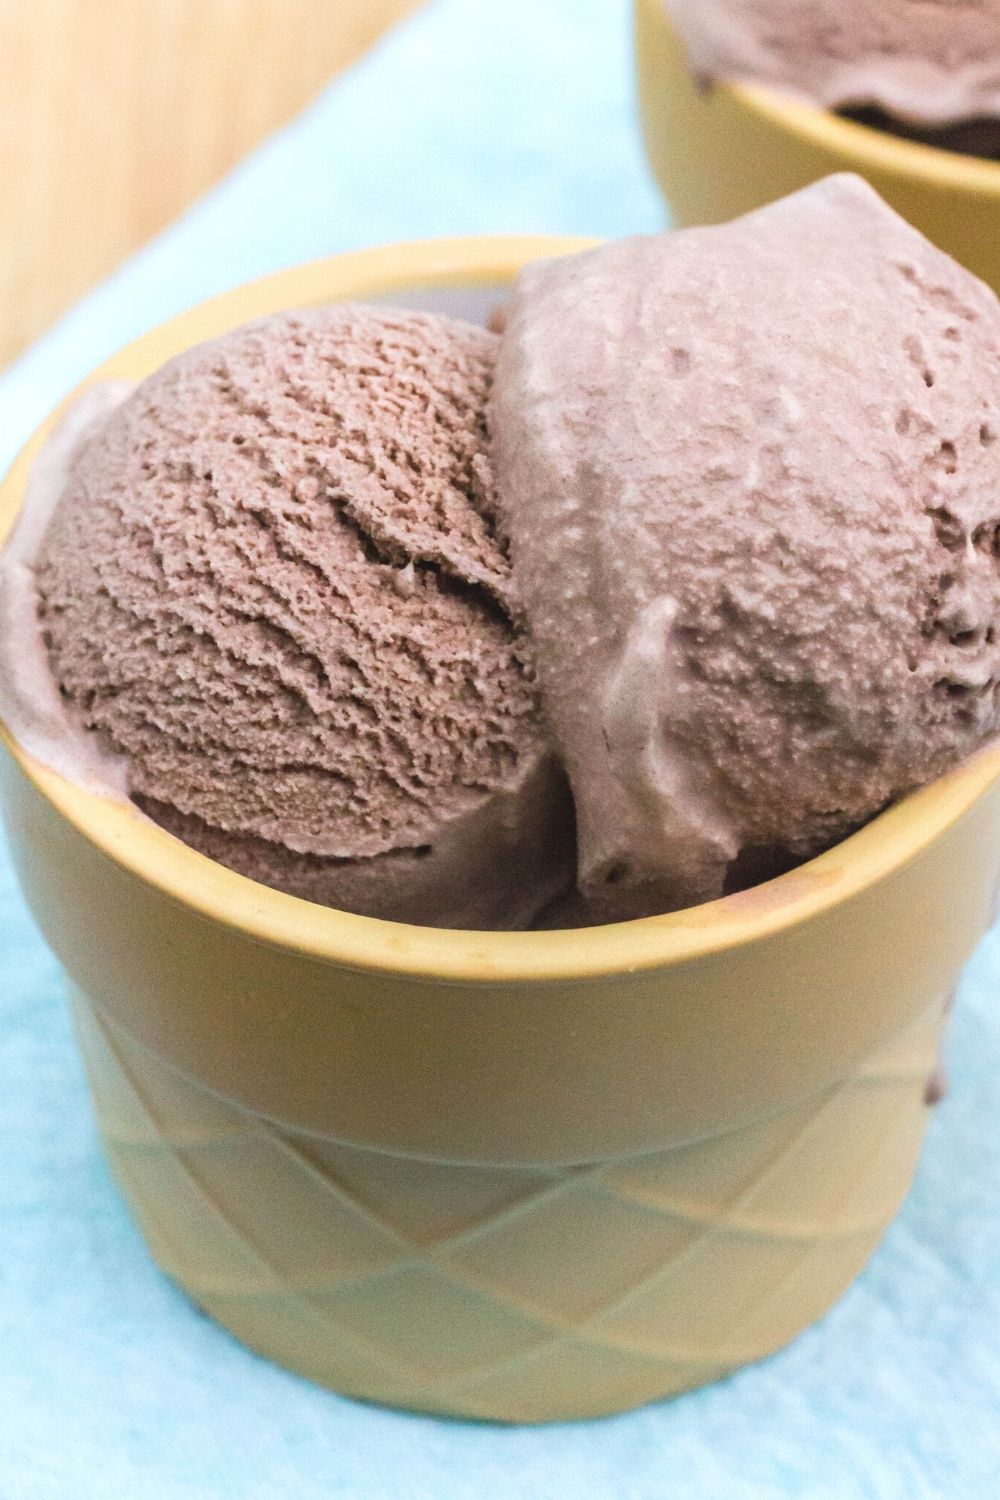 close-up view of two scoops of chocolate ice cream with no added sugar served in a tan dessert cup